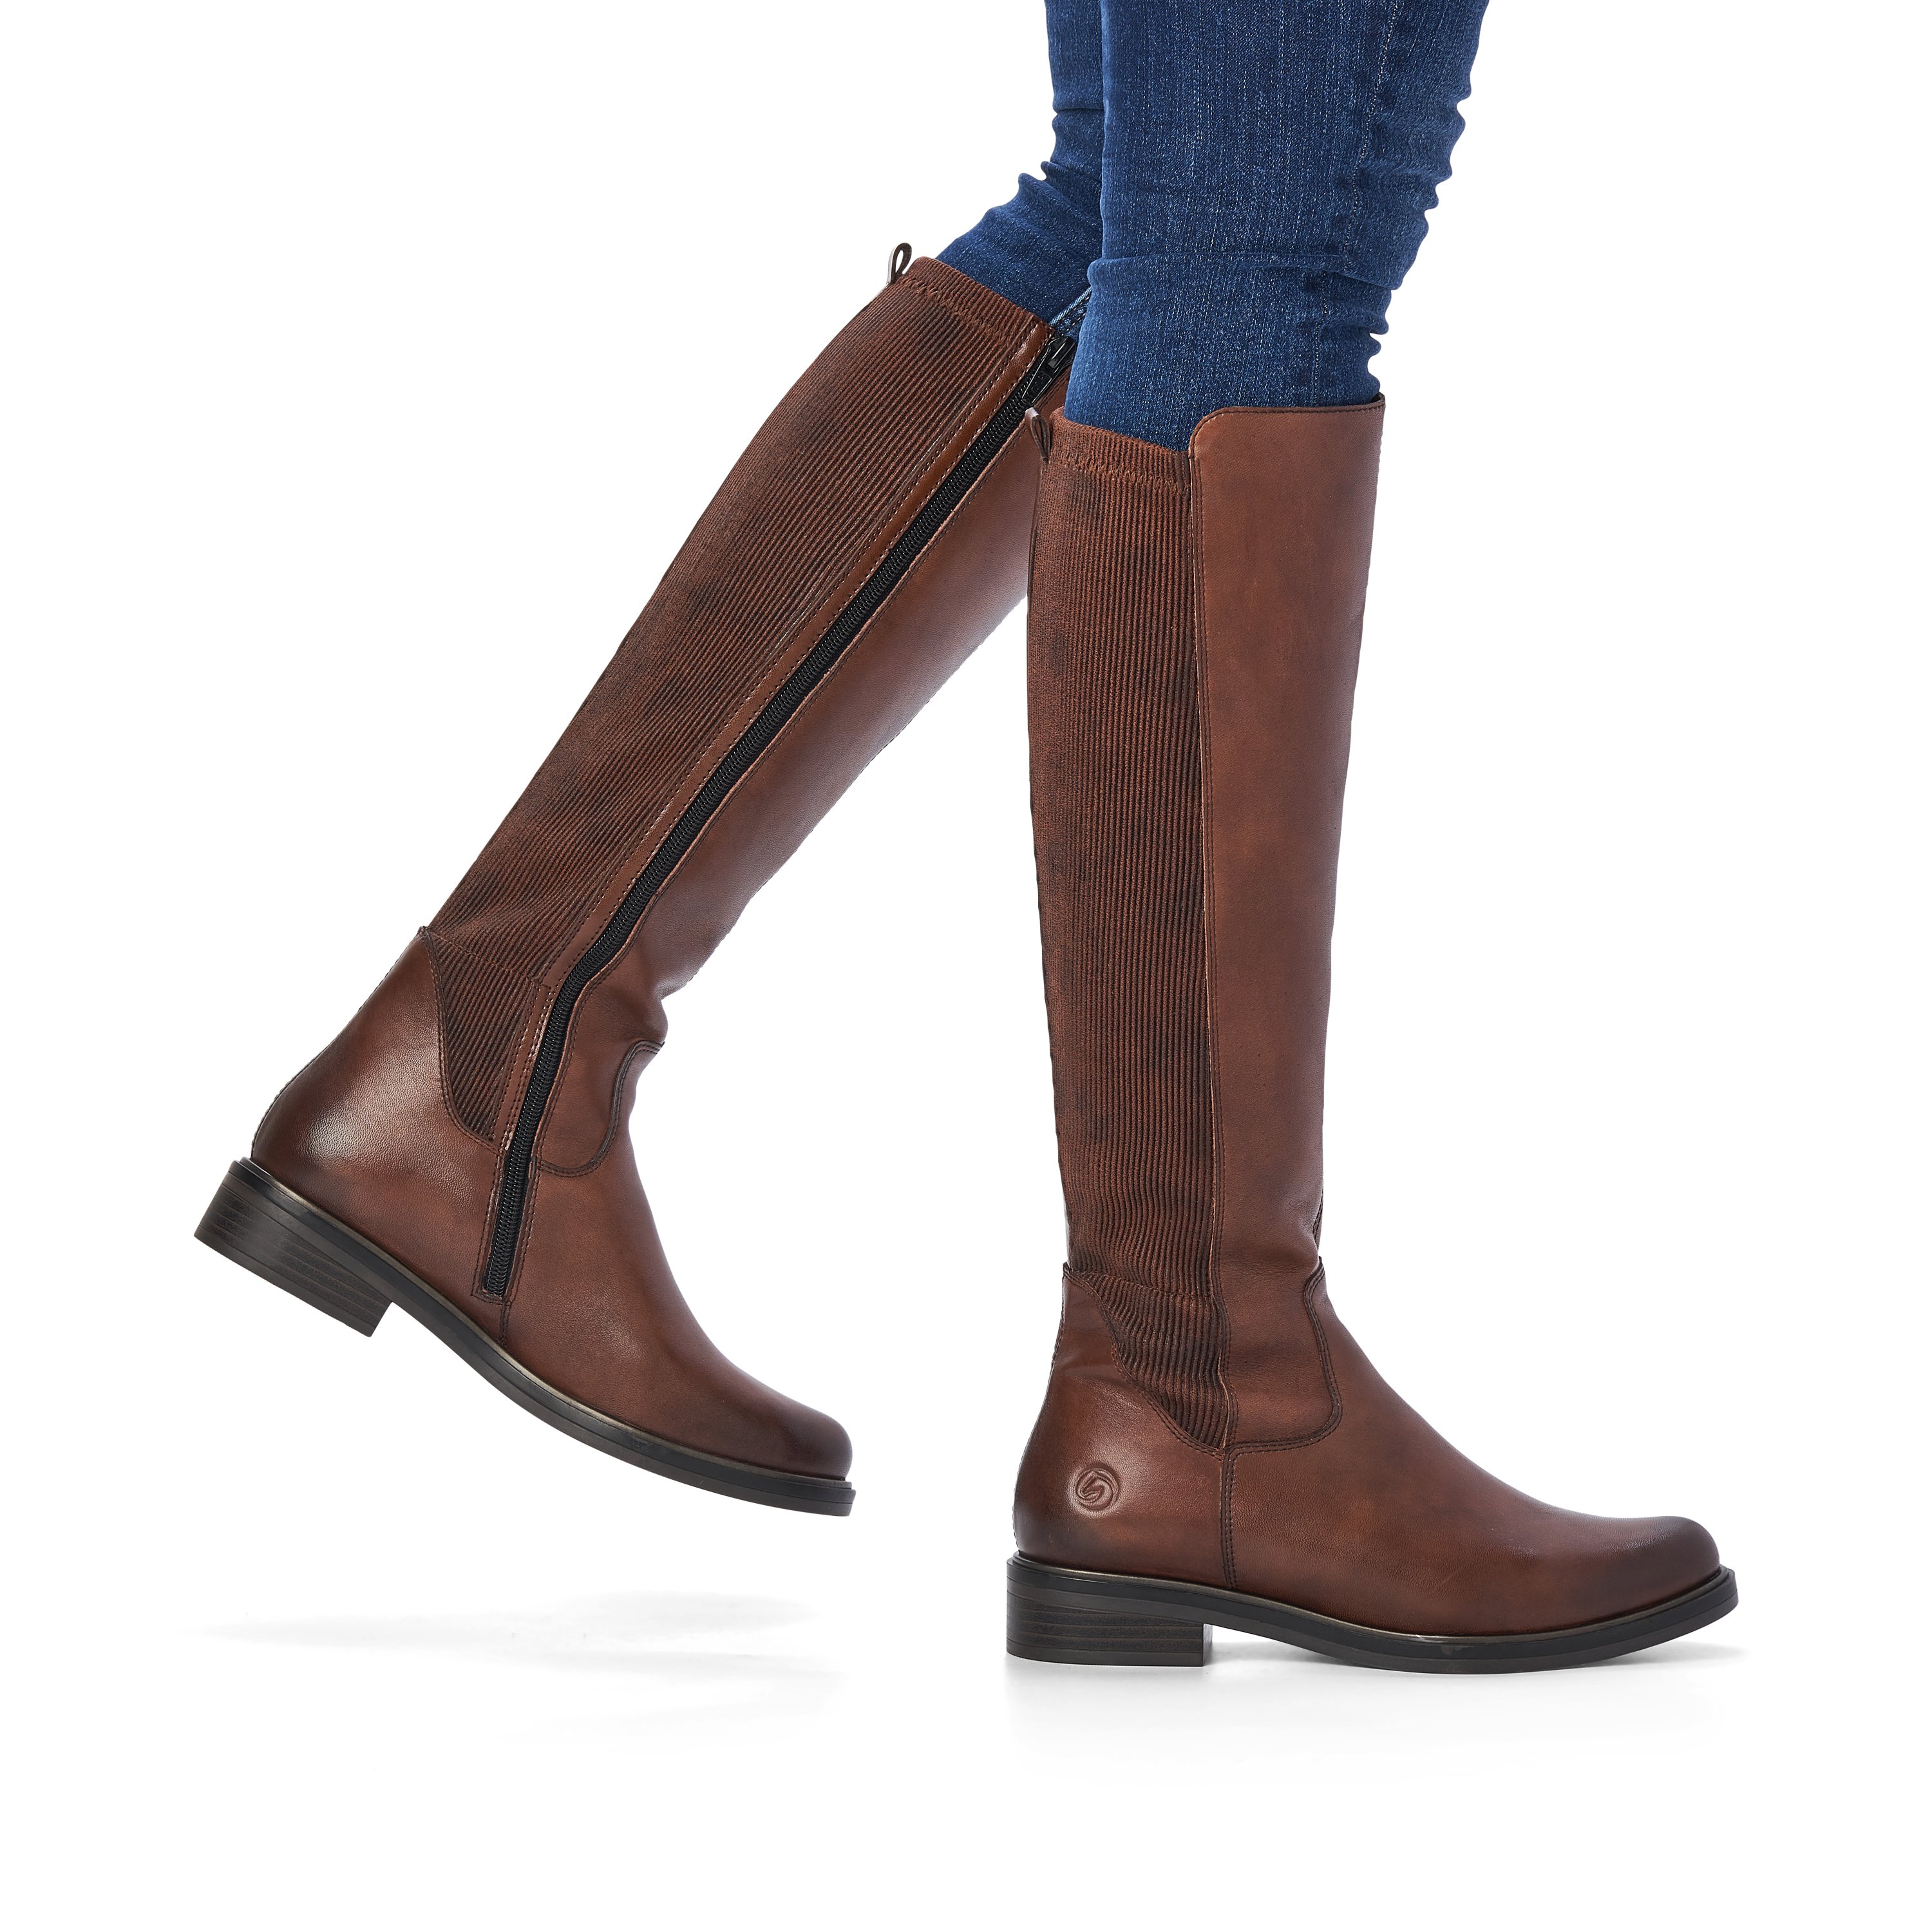 Hazel remonte women´s high boots D8371-25 with zipper as well as profile sole. Shoe on foot